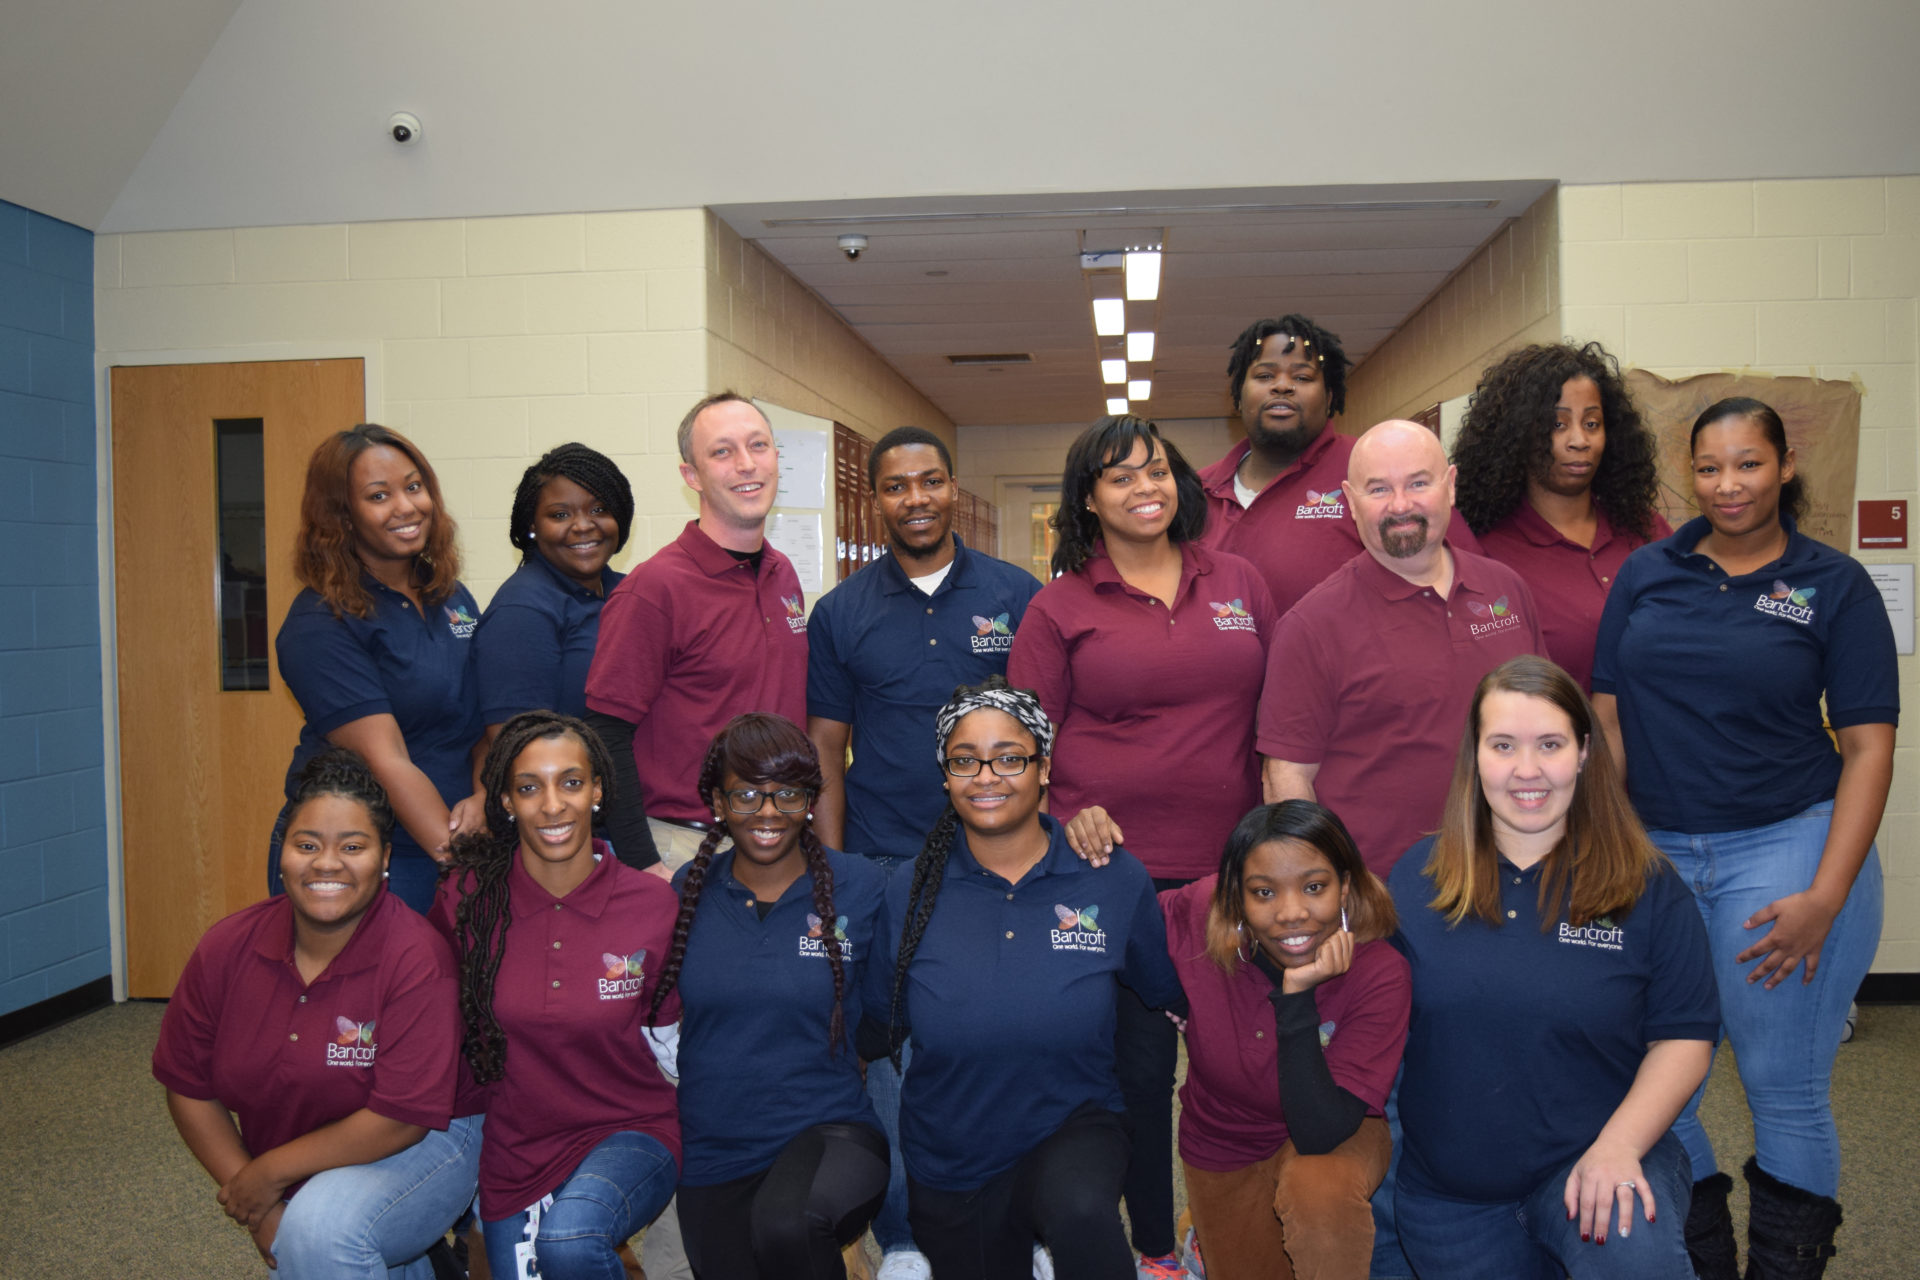 15 paraprofessionals in maroon and blue collared shirts stand and kneel in two lines smiling